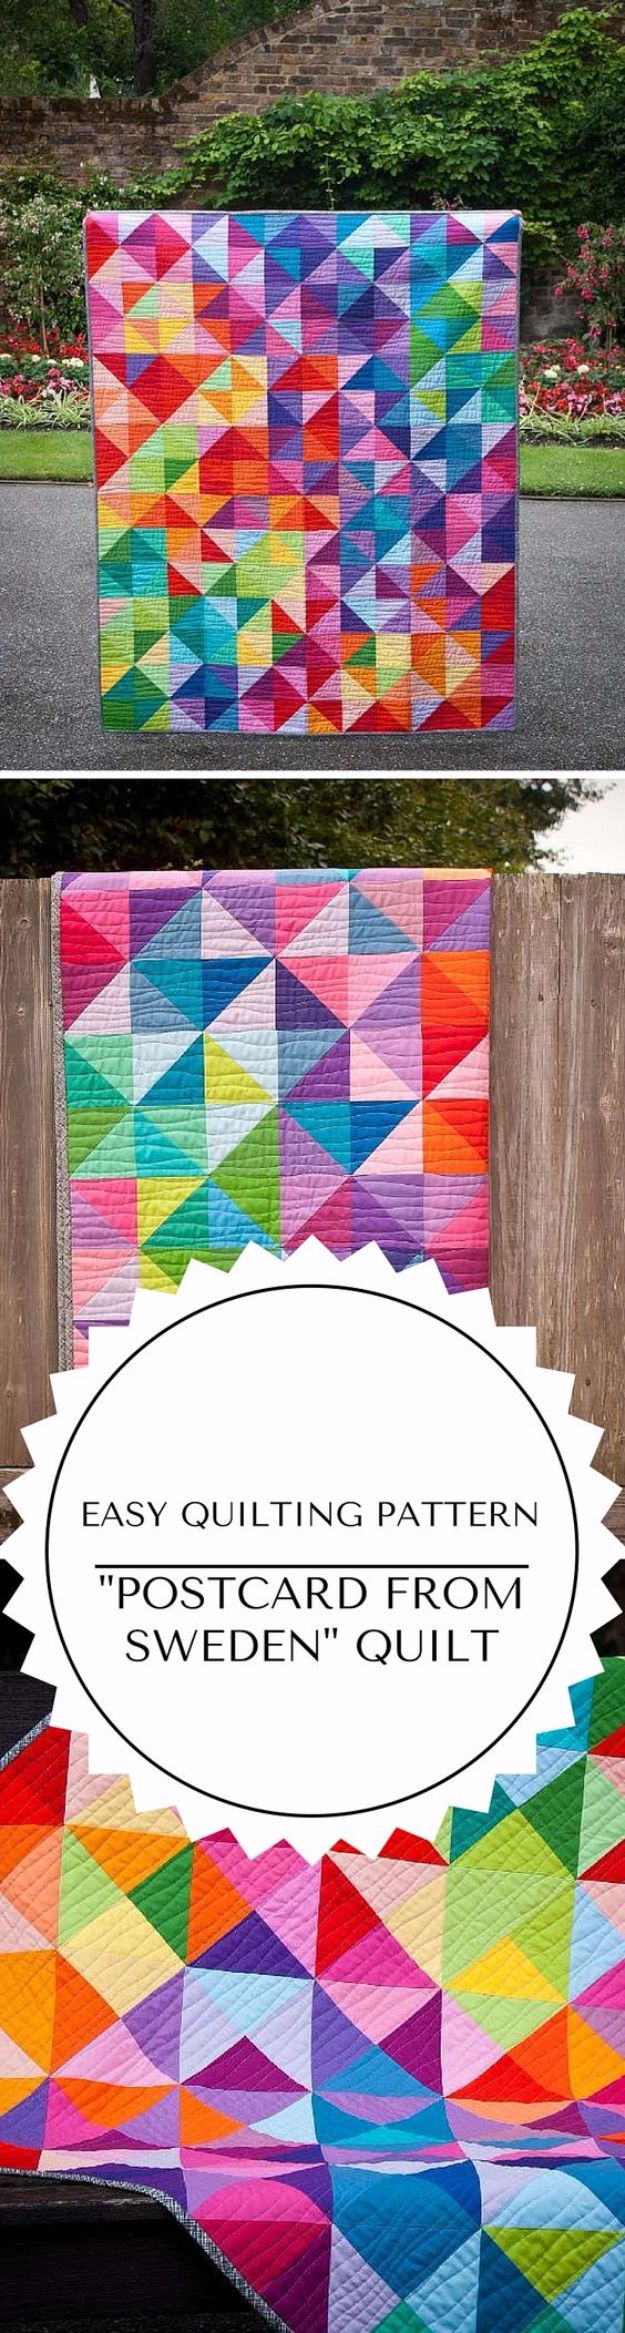 Best Quilts to Make This Weekend - Postcard From Sweden Quilt - Free Quilt Patterns and Quilting Tutorials - Quilting for Beginners and Sewing Ideas - DIY Baby Quilts, Printables, New and Easy Modern Quilts, Jelly Roll, Quilt Squares, Fat Quarters and Scrap Ideas #diy #quilting #sewing